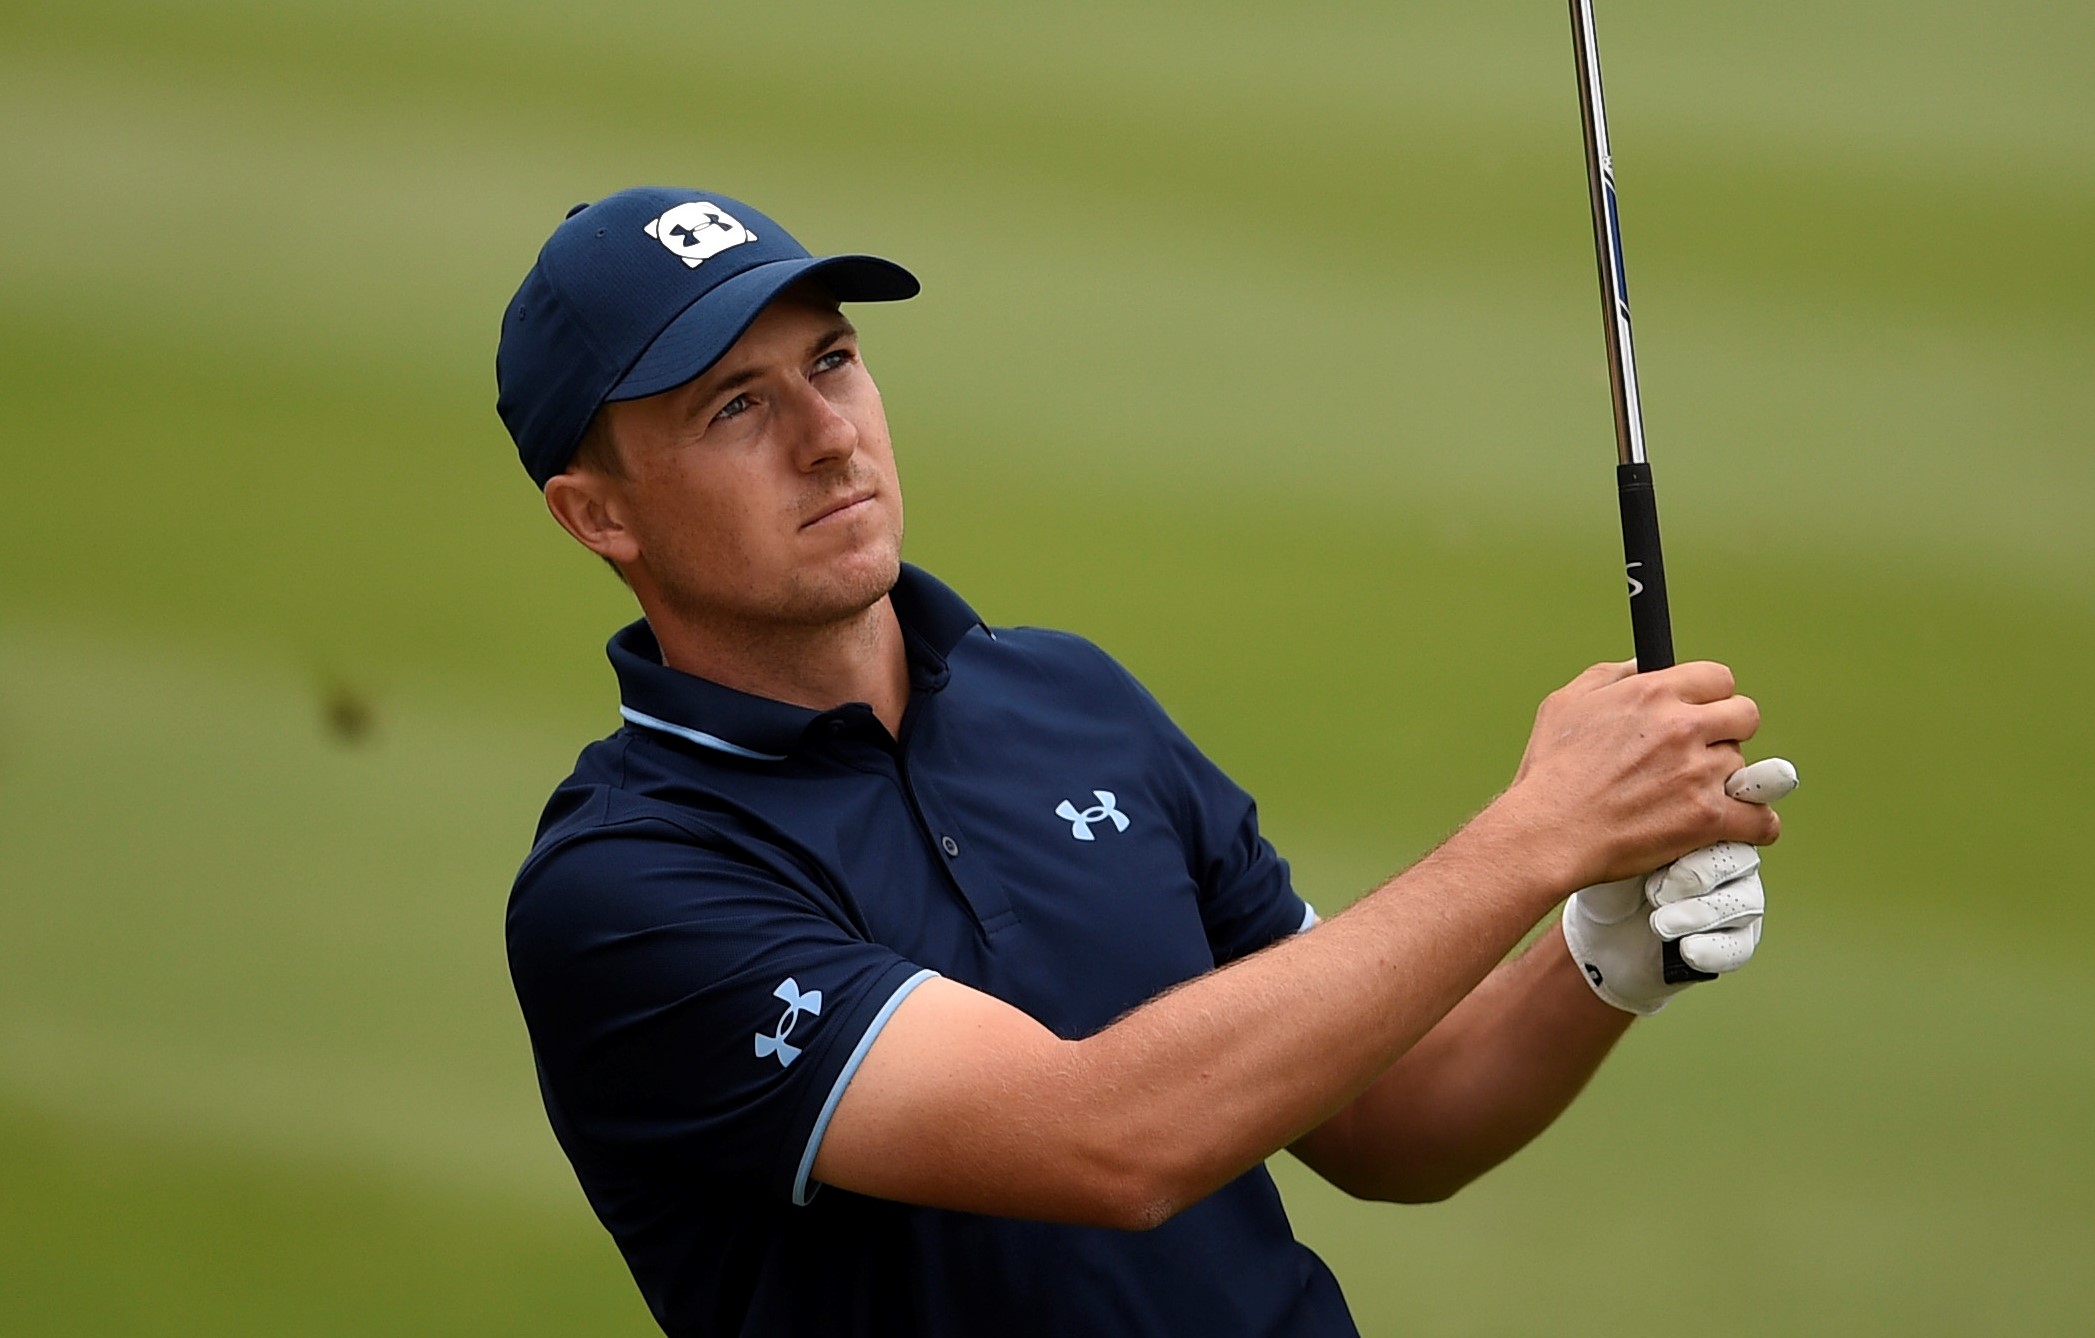 WATCH Jordan Spieth hits the GREATEST FLOP SHOT on the PGA Tour this year! GolfMagic